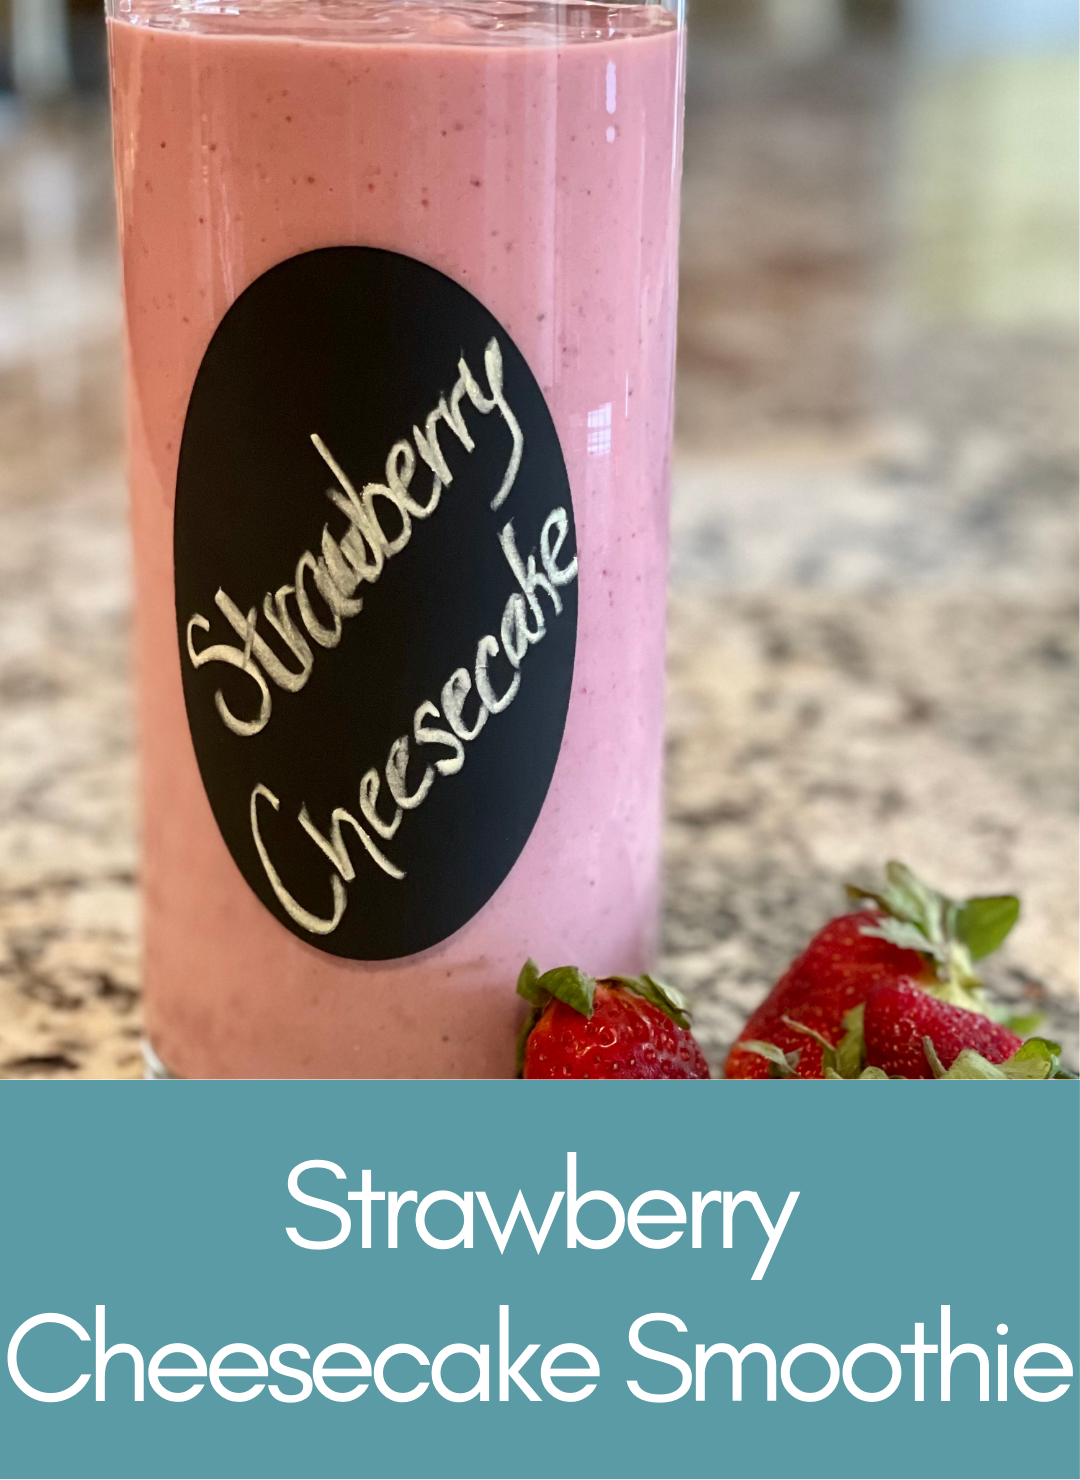 Vegan strawberry cheesecake smoothie Picture with link to recipe